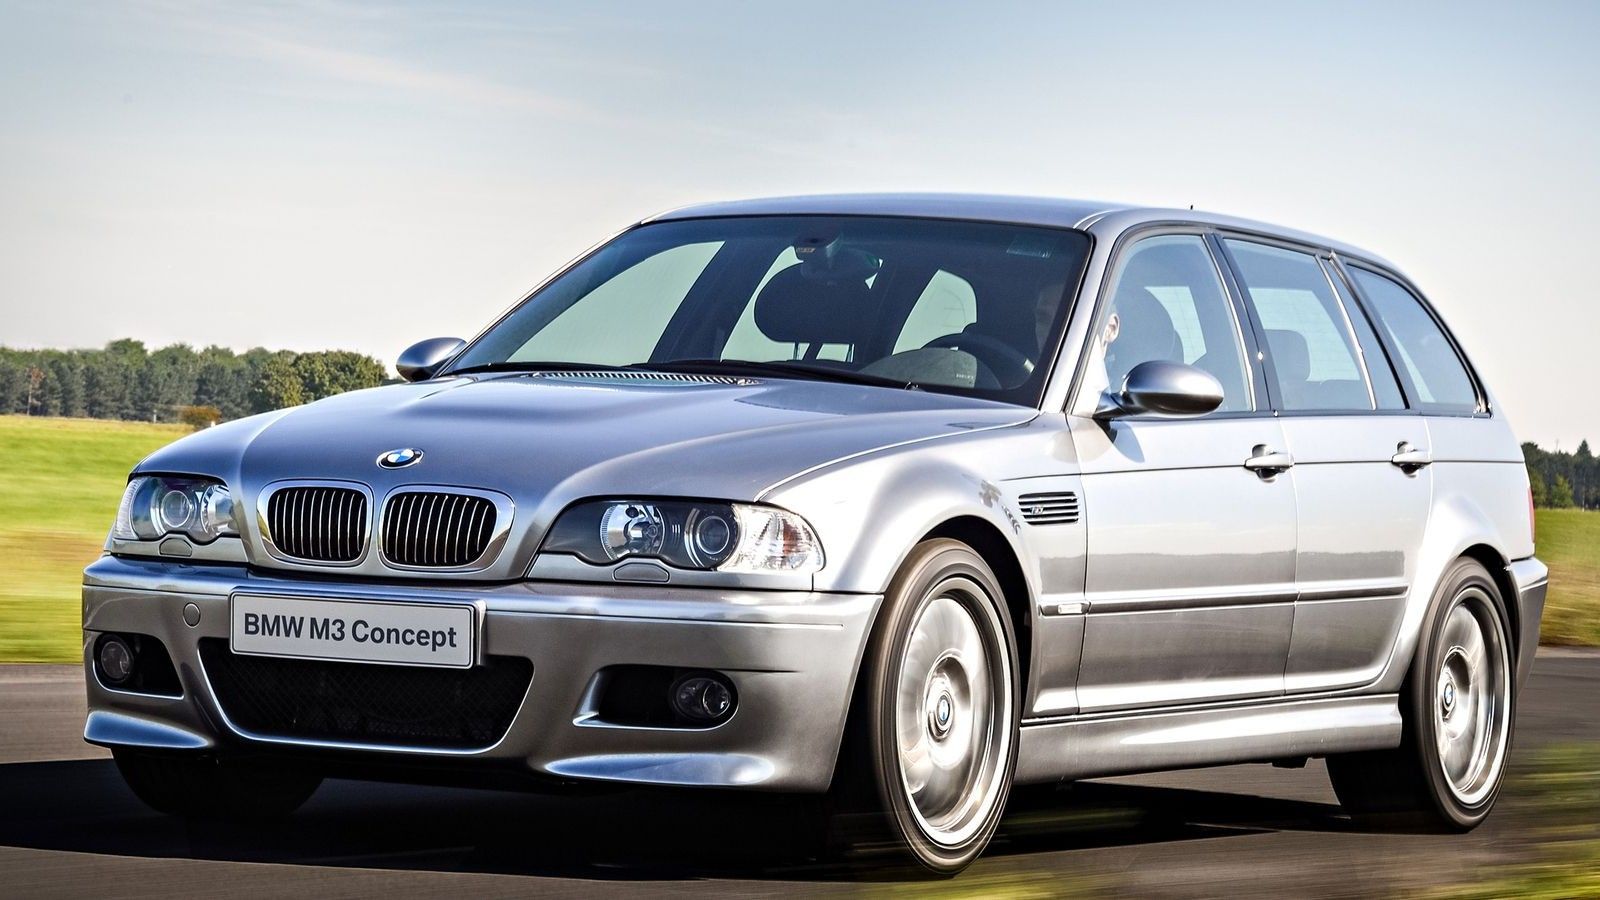 Is The BMW E46 M3 The Best M Car Ever Made?